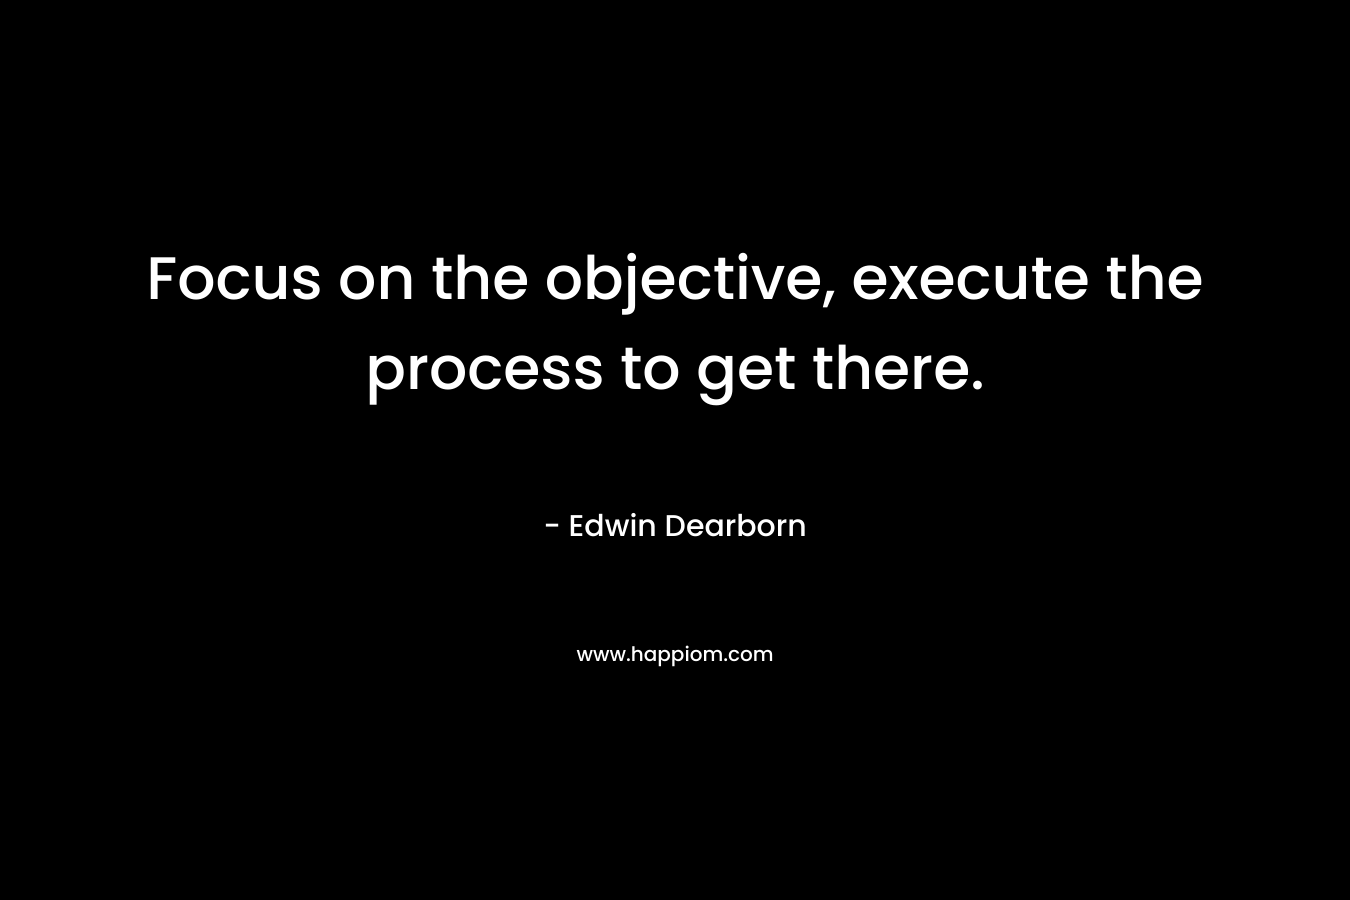 Focus on the objective, execute the process to get there.